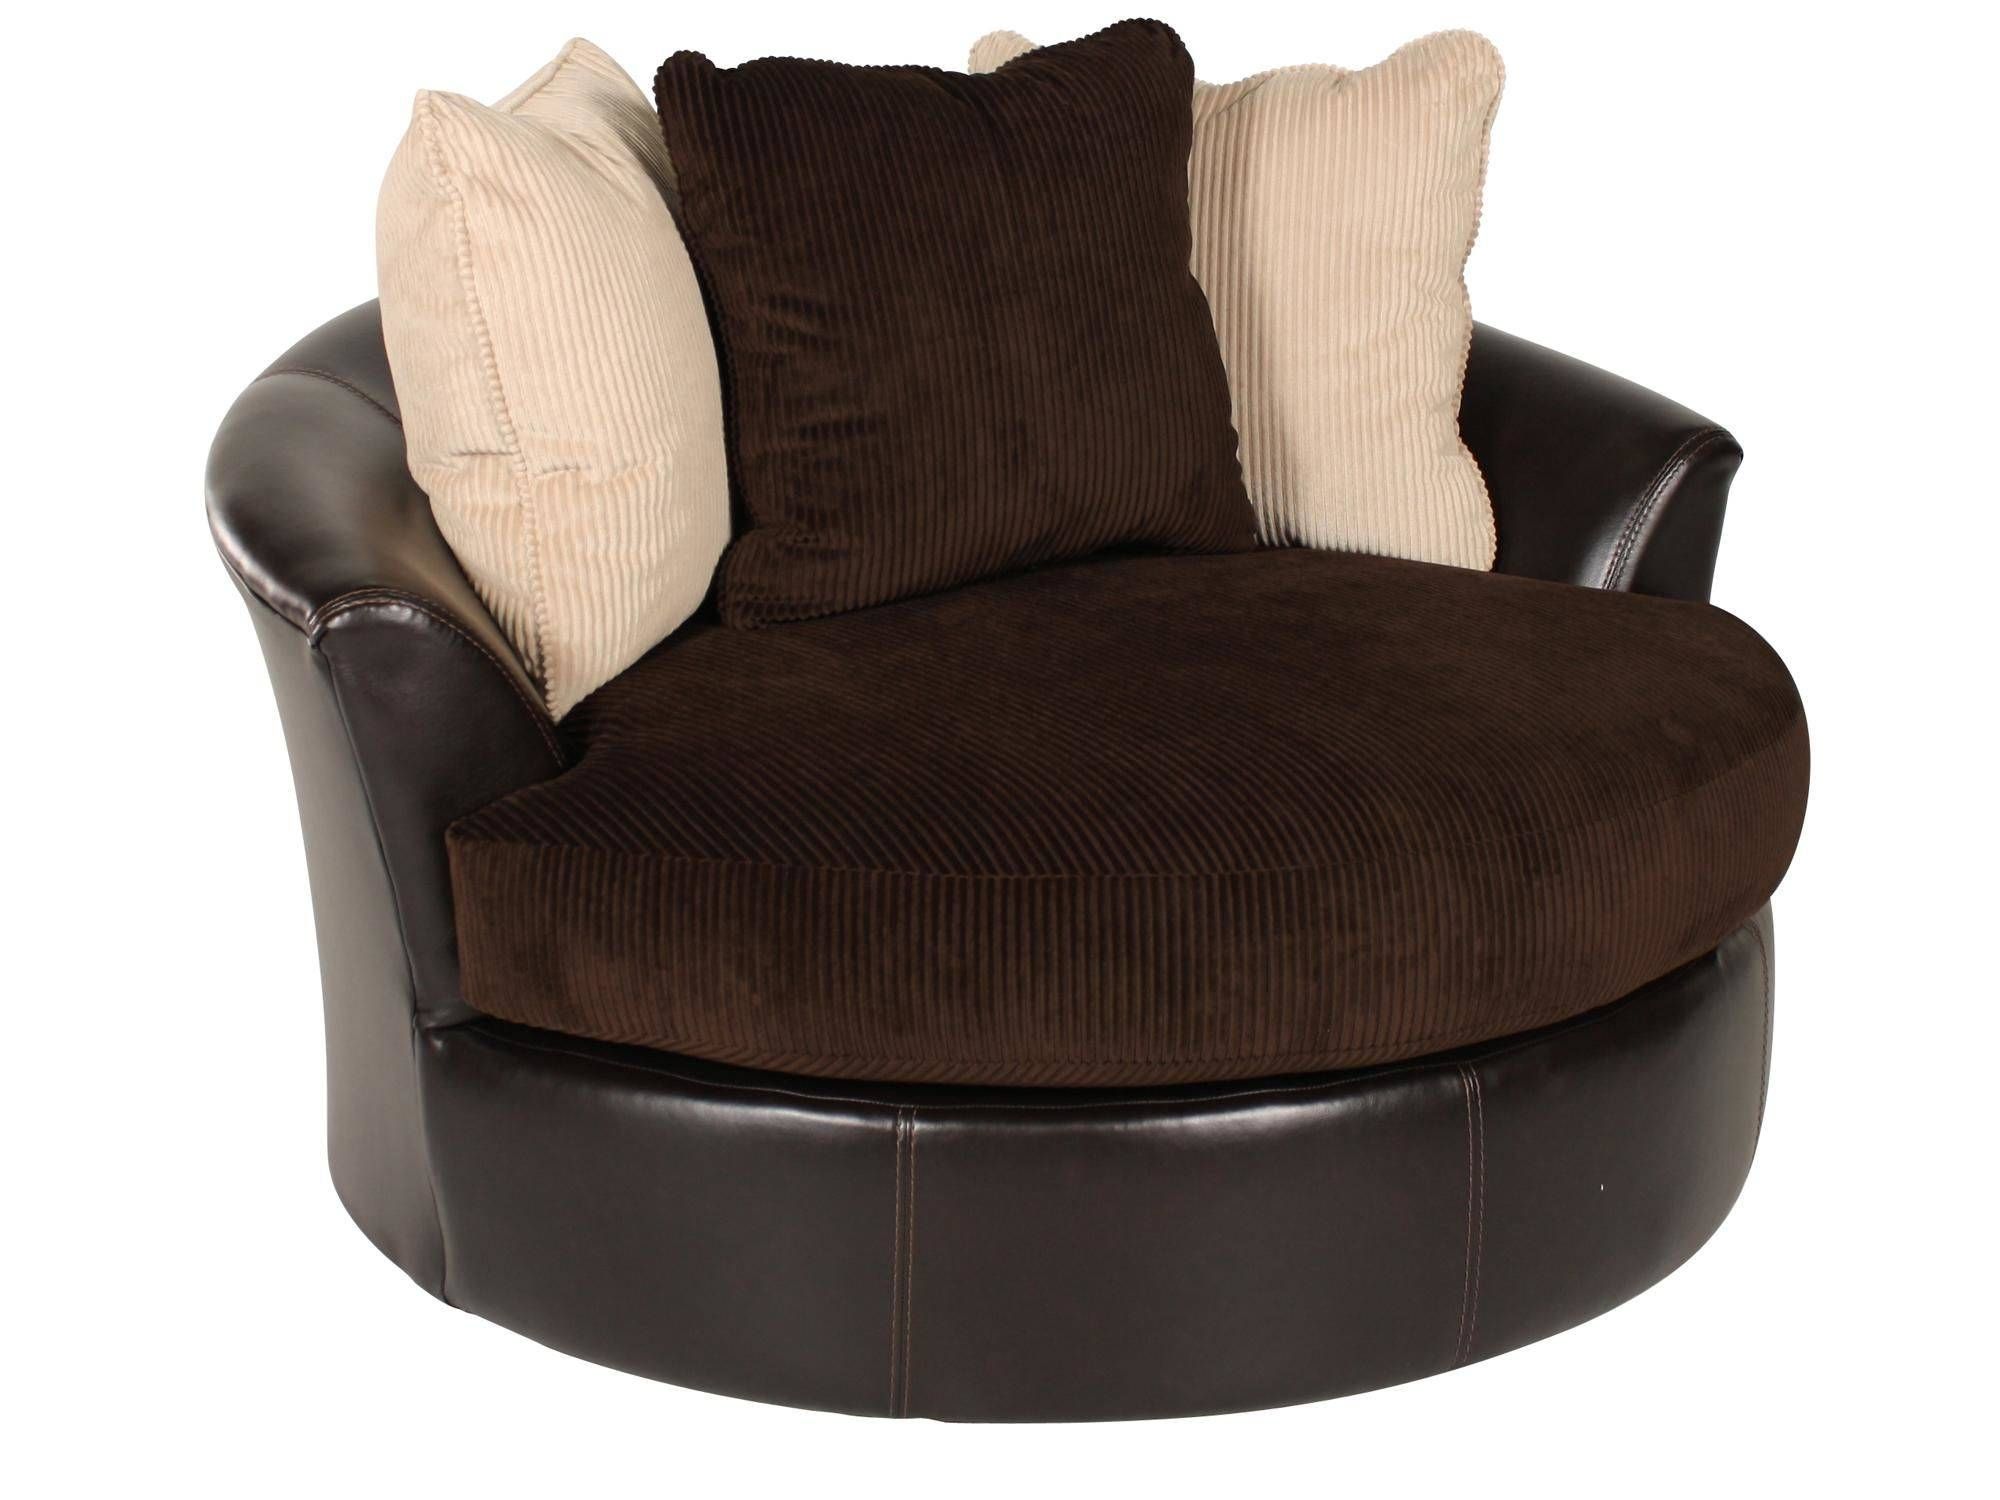 Surprising Round Sofa Chair For Your Furniture Chairs With In Sofa Chairs (View 14 of 30)